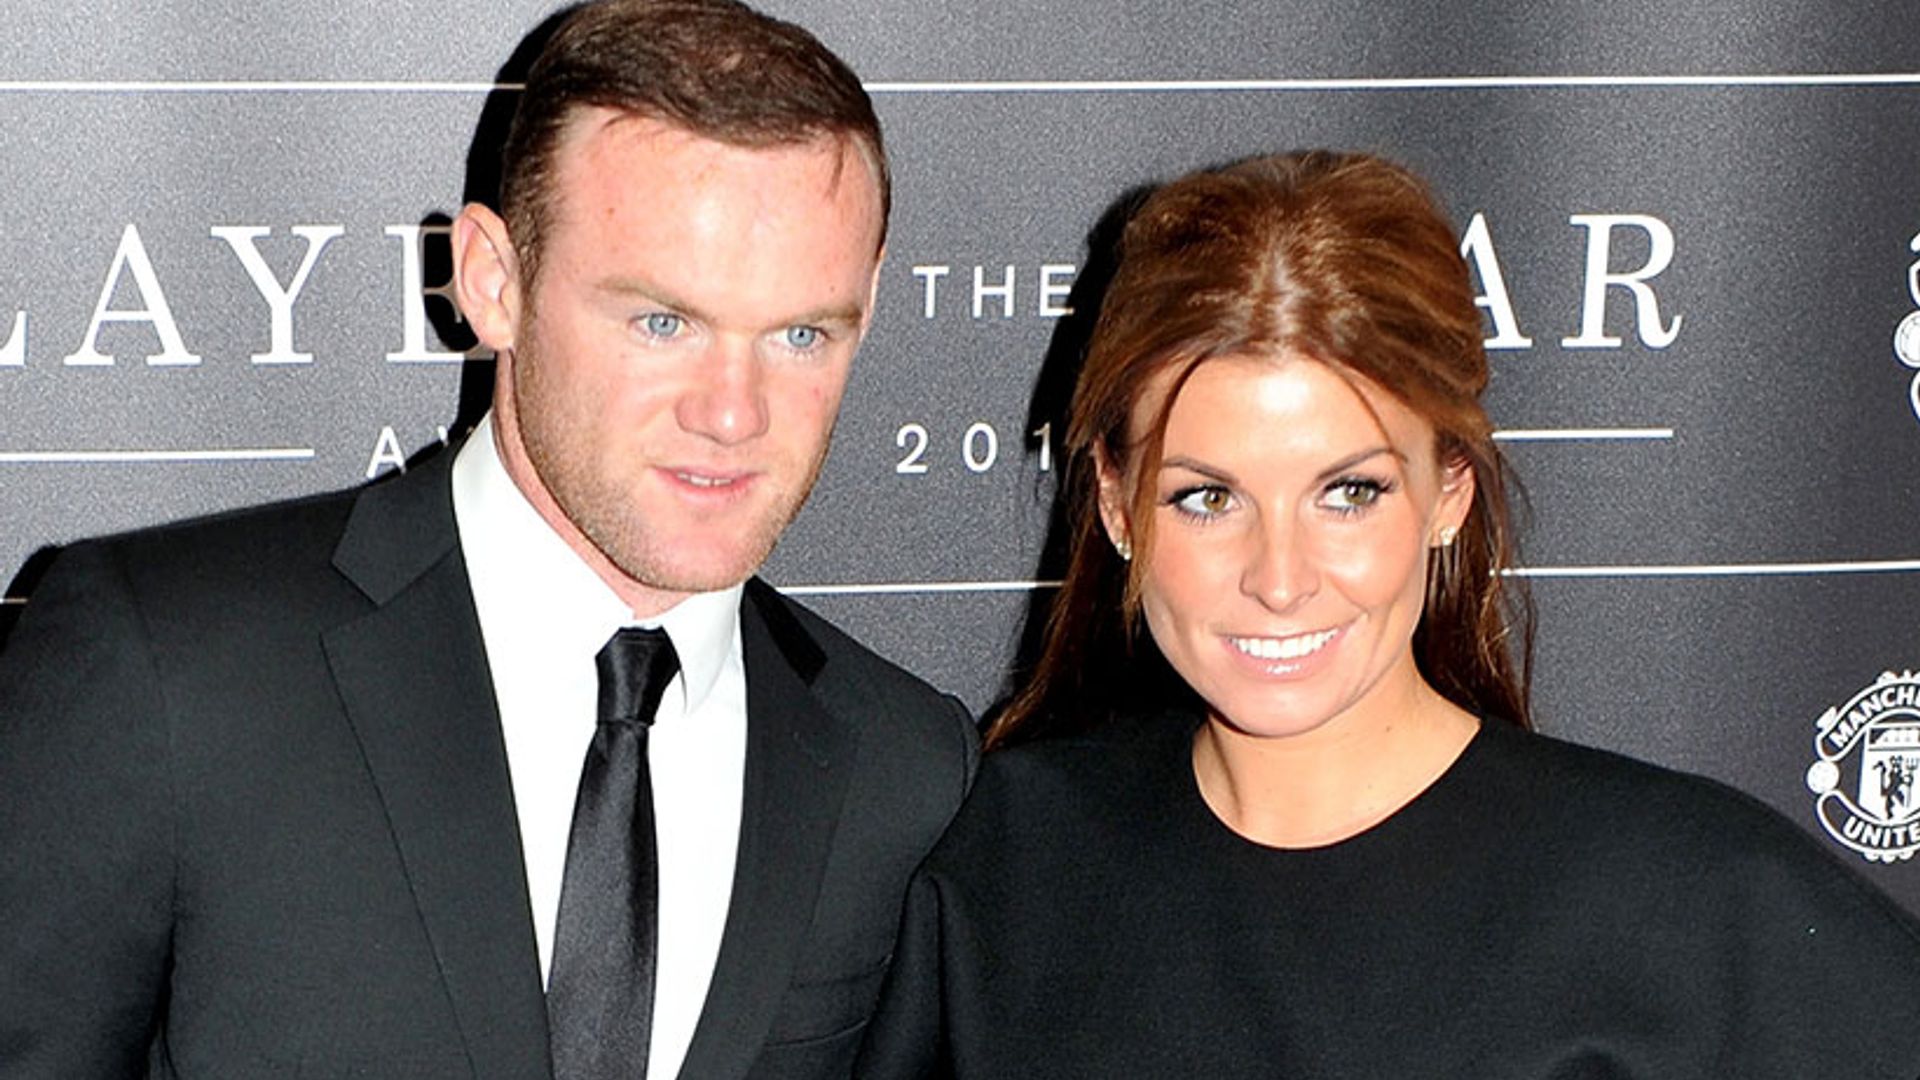 Coleen and Wayne Rooney pictured together for first time since split ...